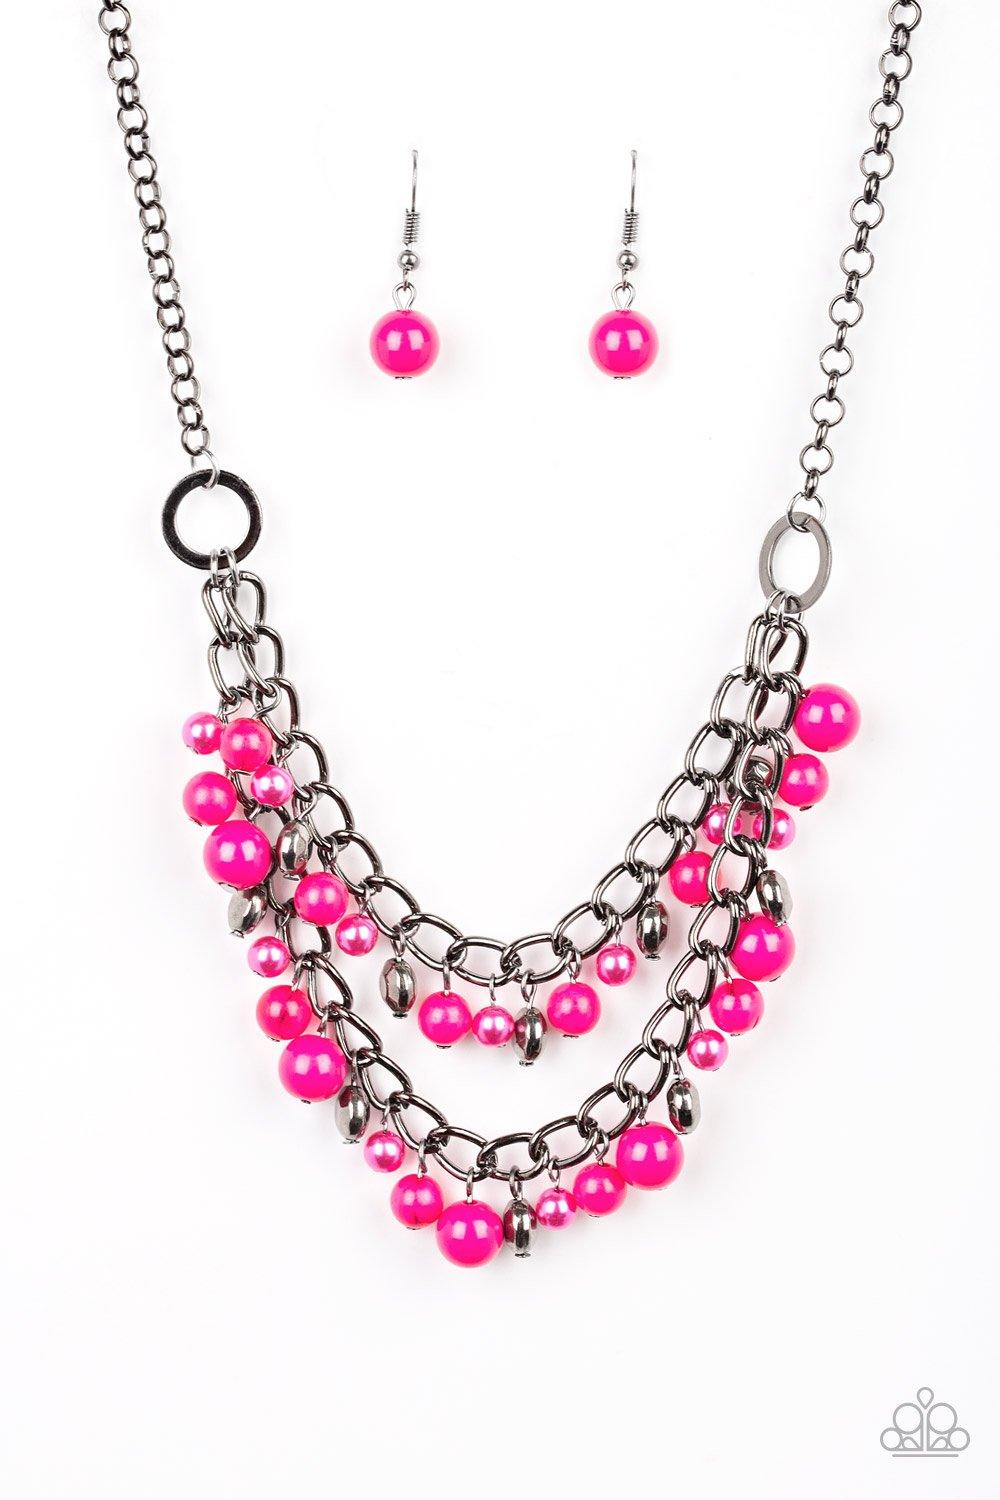 Paparazzi Accessories Watch Me Now - Pink Pearly and polished pink beading joins faceted gunmetal beads along a bold gunmetal chain, creating a sassy fringe below the collar. Features an adjustable clasp closure. Sold as one individual necklace. Includes